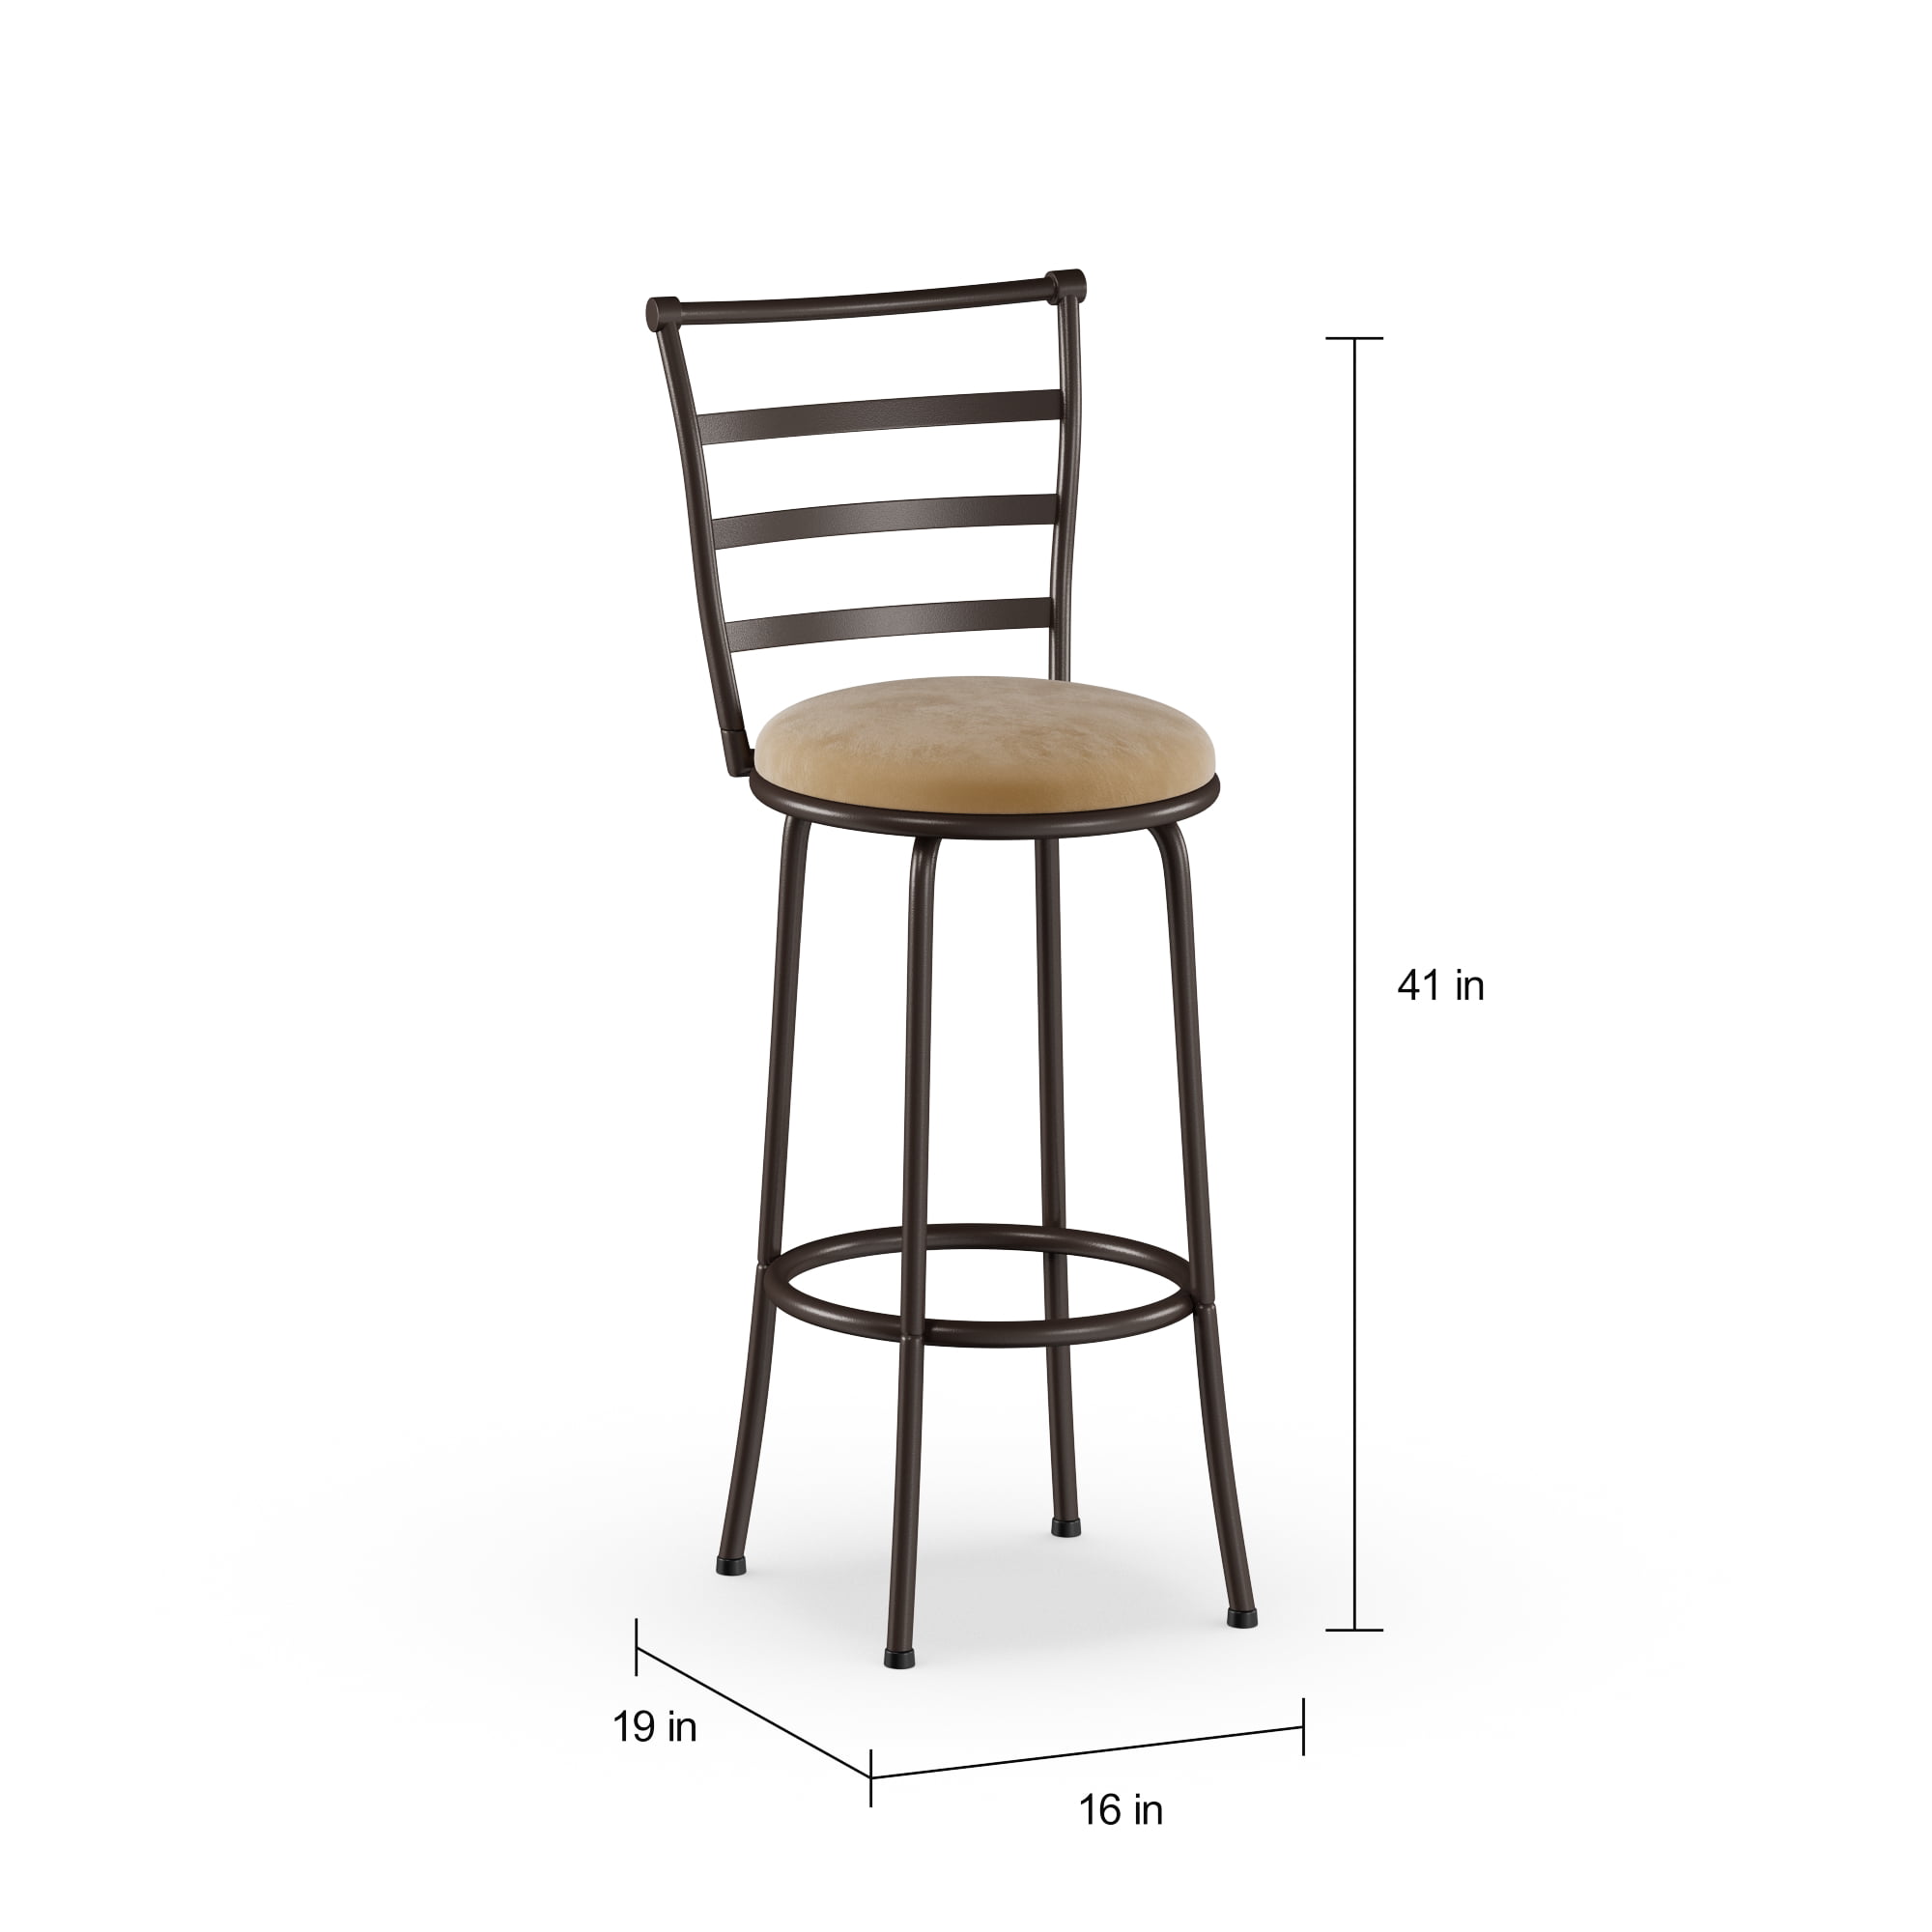 Adjustable Swivel Bar Stools for Kitchen Counter